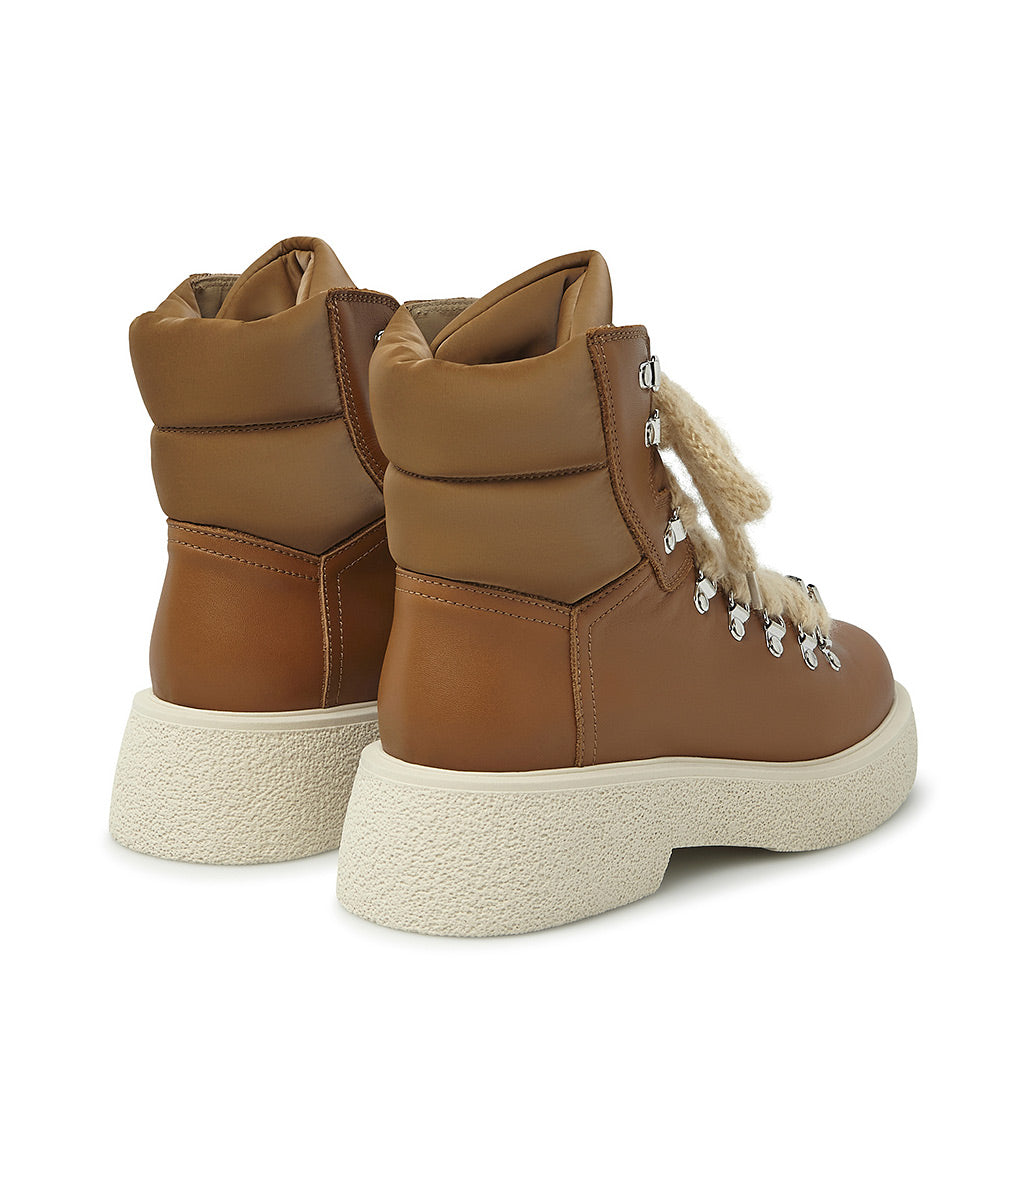 Tan padded nylon and leather ankle boots